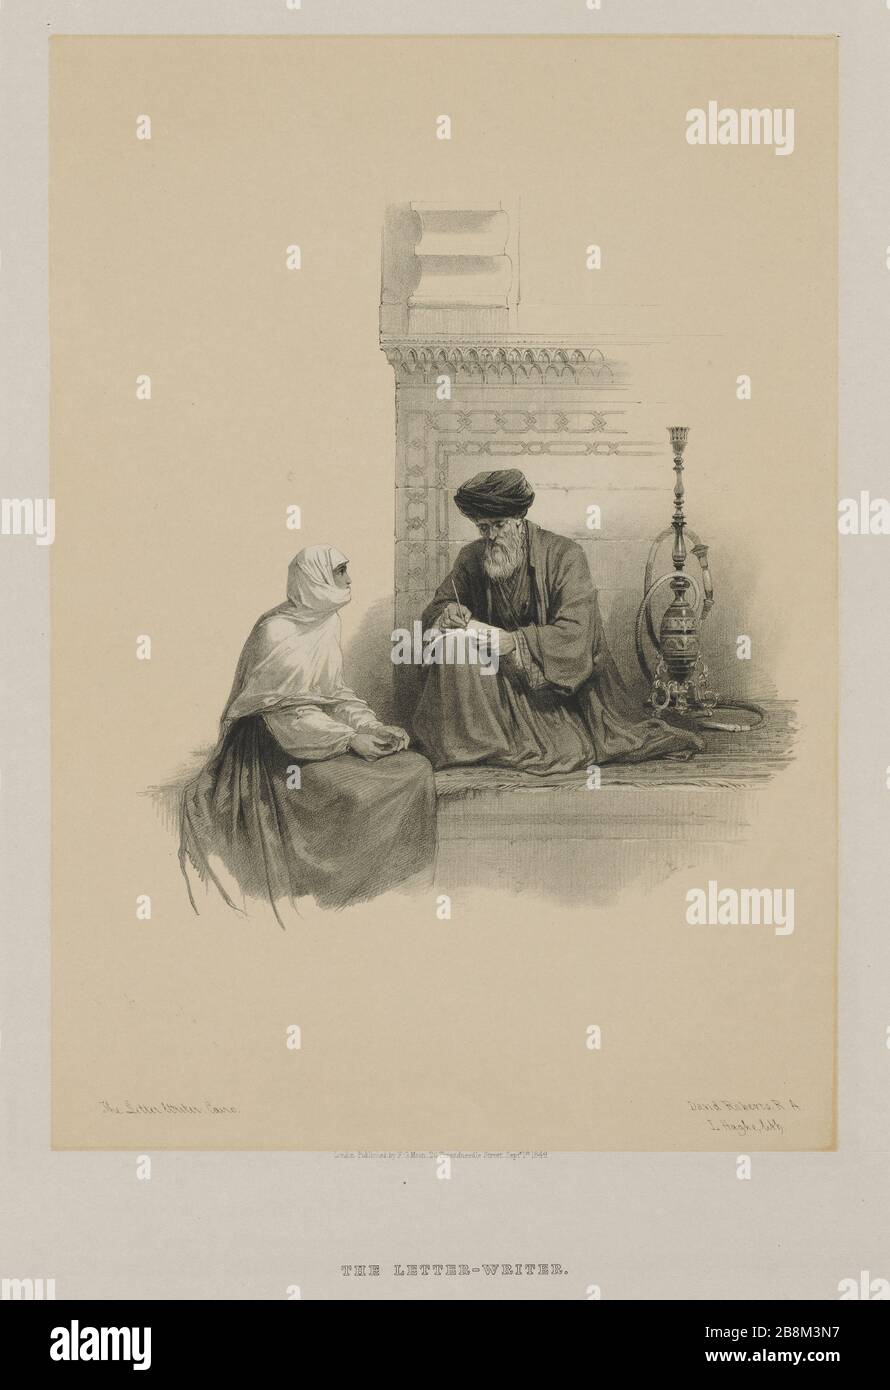 Egypt and Nubia, Volume III: The Letter-Writer, Cairo, 1849. Louis Haghe (British, 1806-1885), F.G.Moon, 20 Threadneedle Street, London, after David Roberts (British, 1796-1864). Color lithograph; Stock Photo